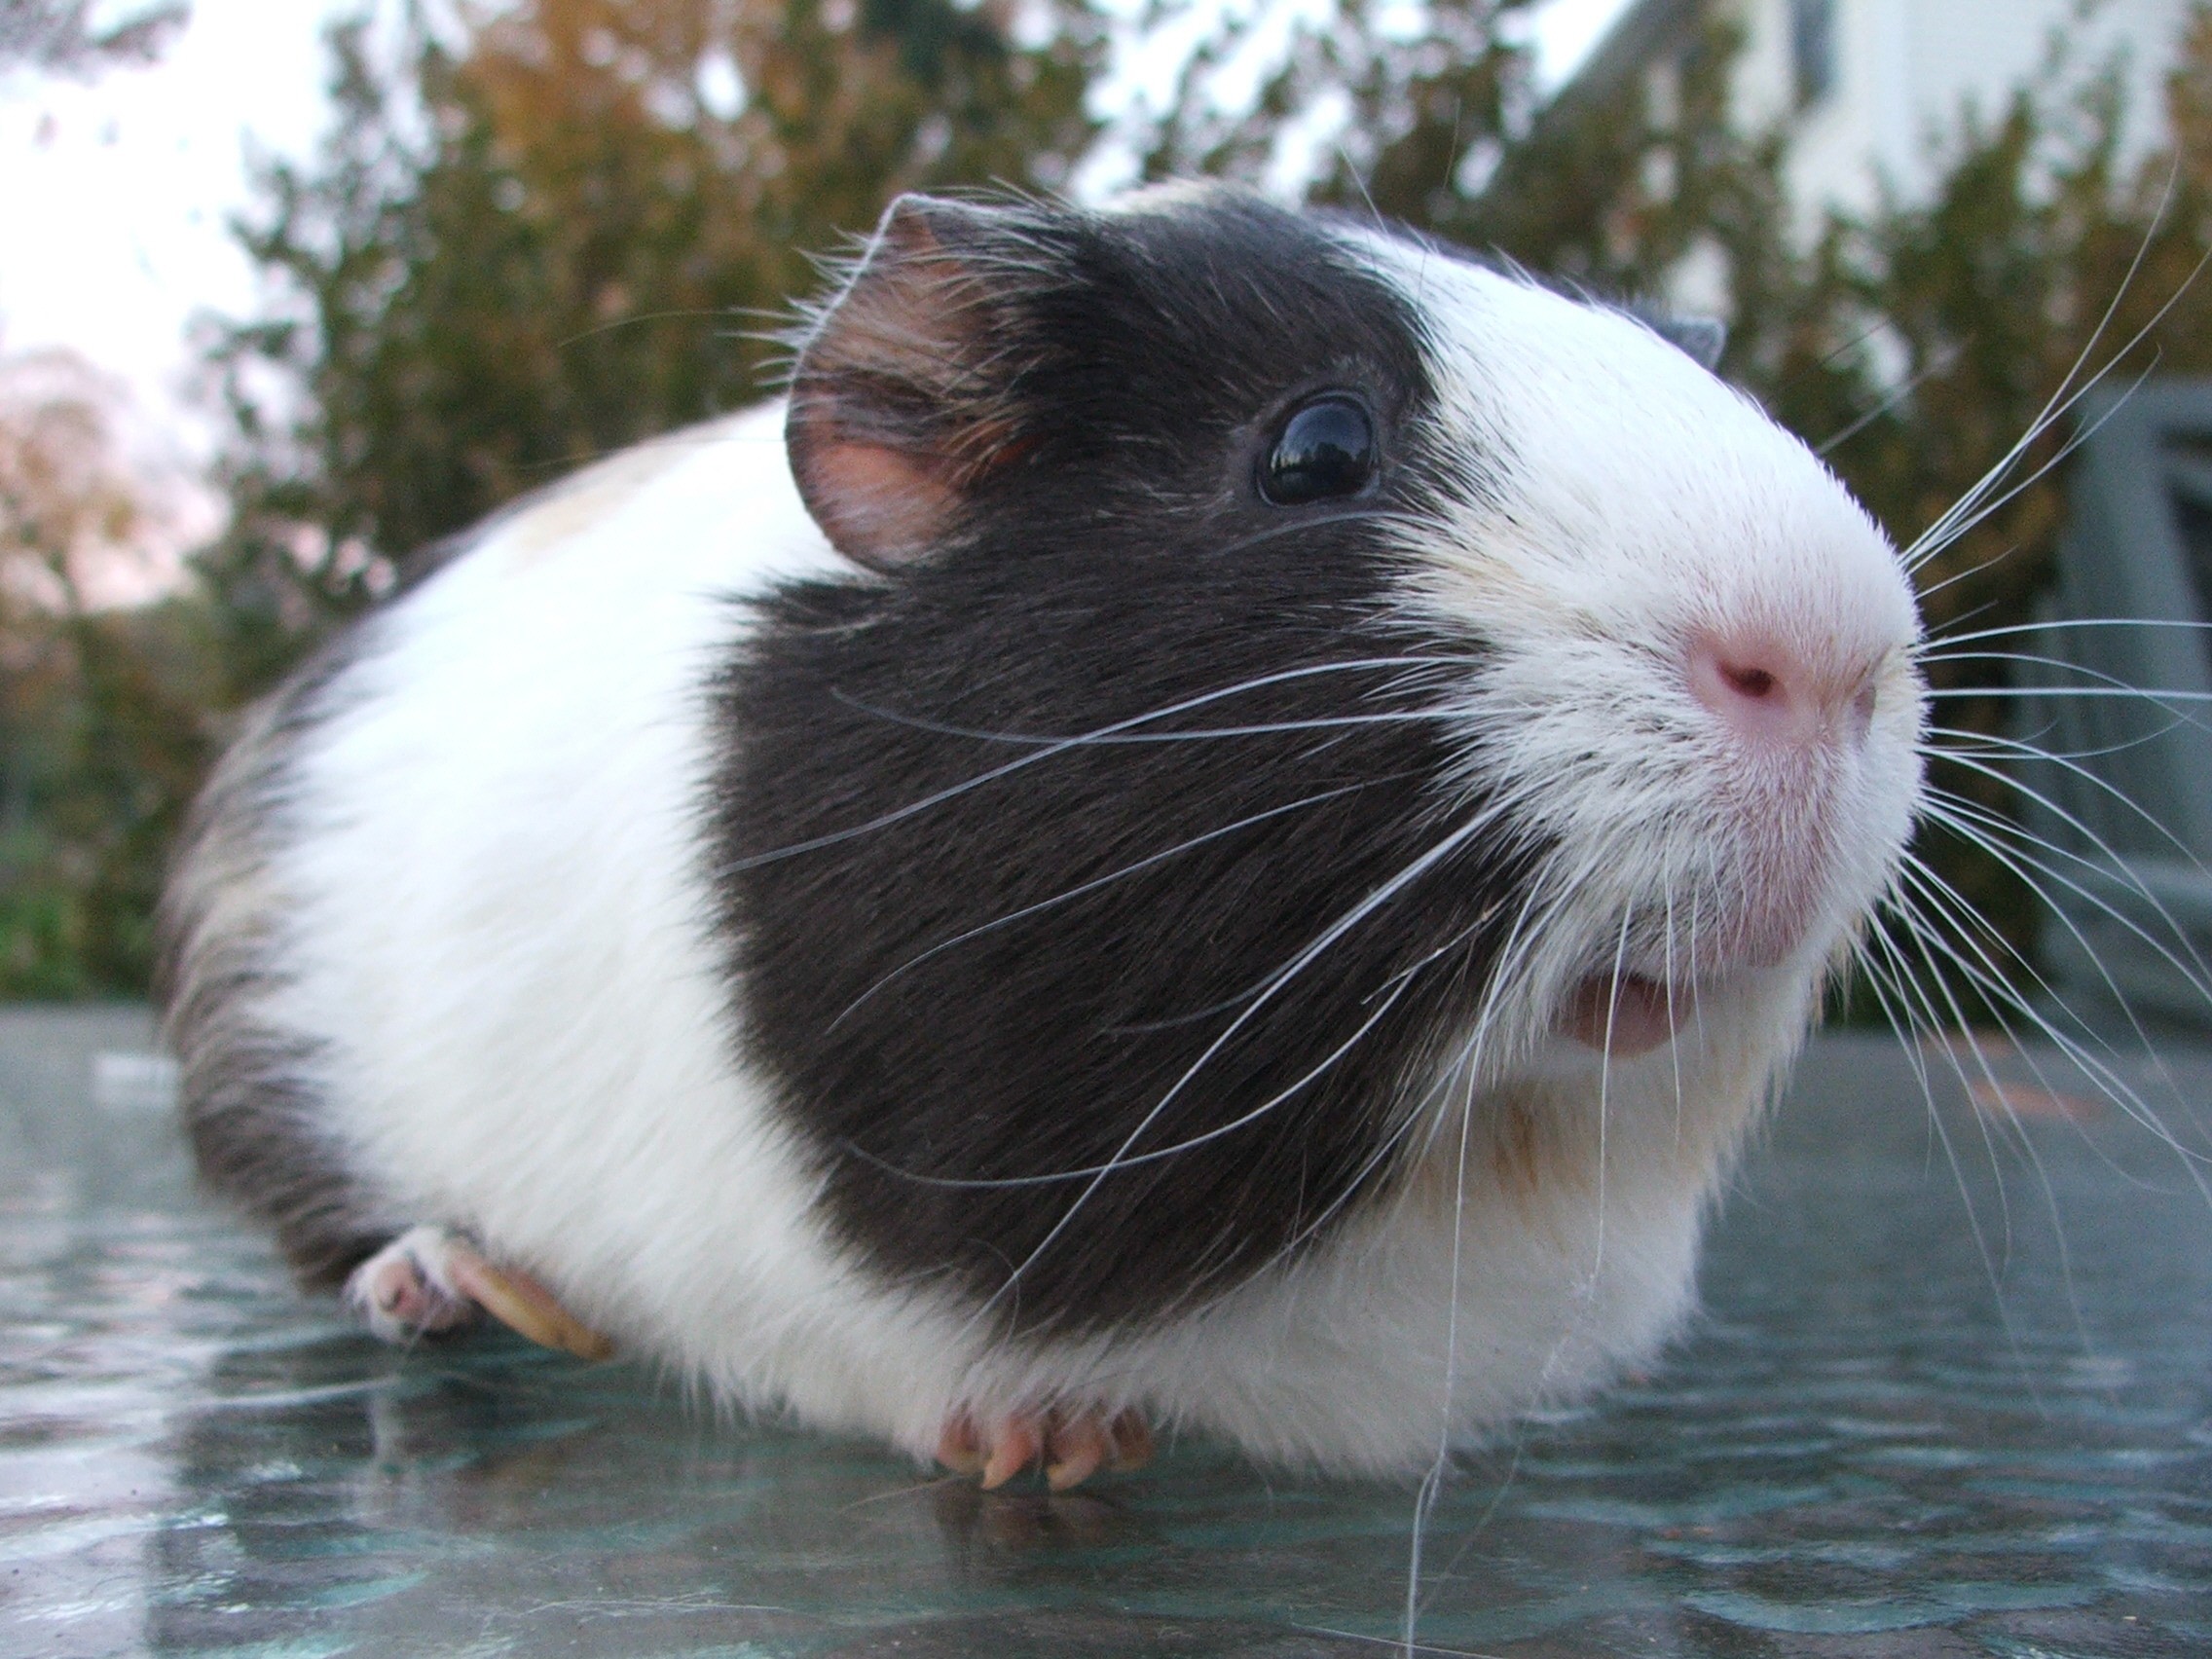 What animal family is a guinea pig in?